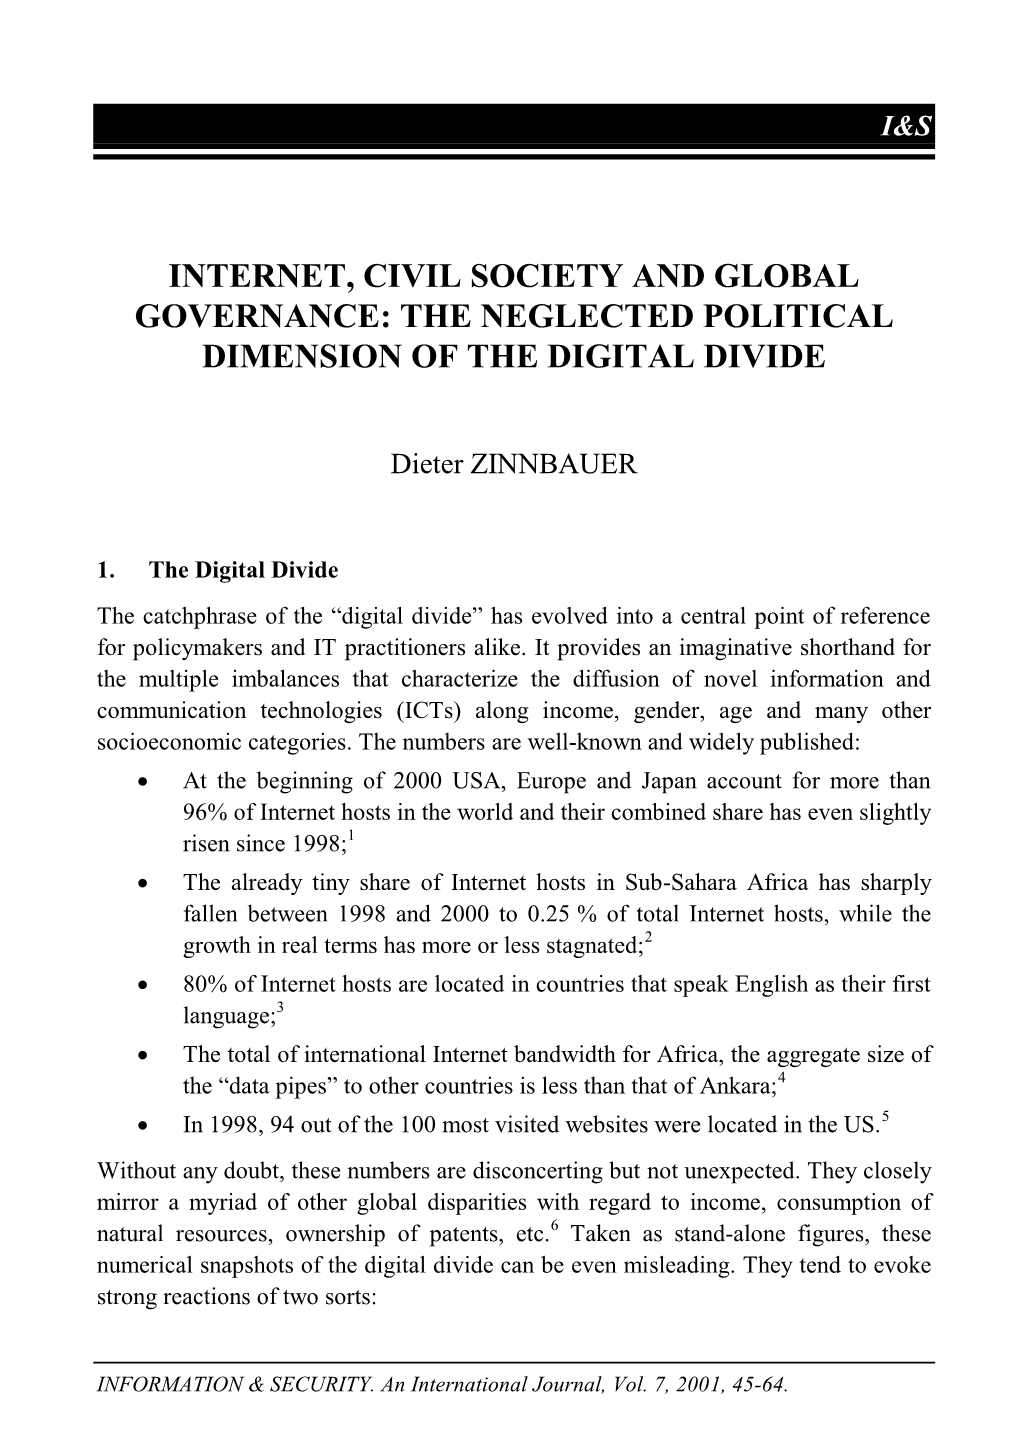 Internet, Civil Society and Global Governance: the Neglected Political Dimension of the Digital Divide